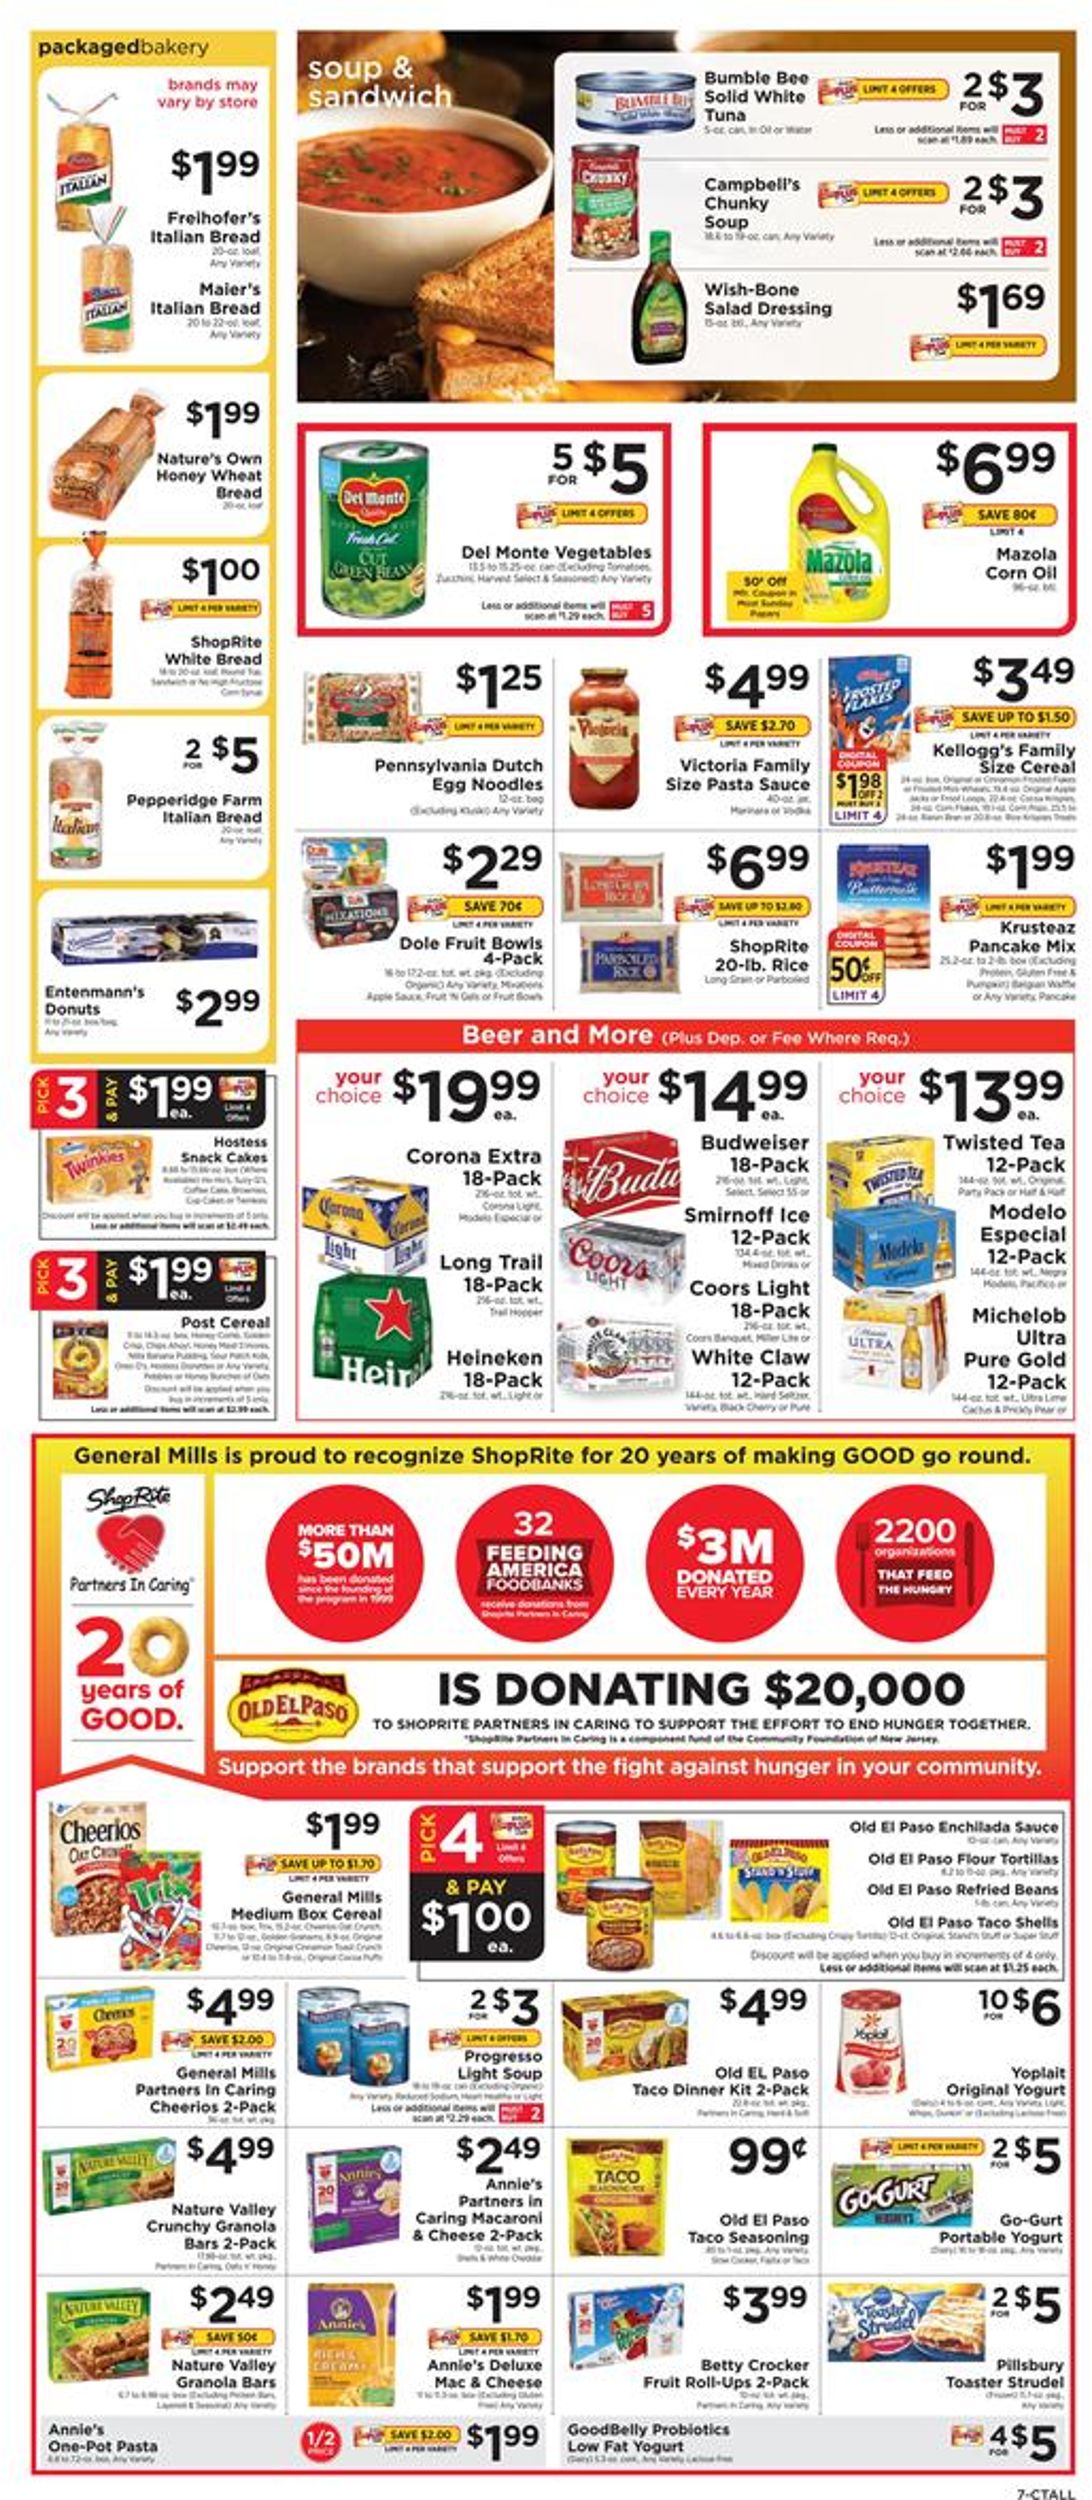 ShopRite Current weekly ad 09/15 - 09/21/2019 [7] - frequent-ads.com